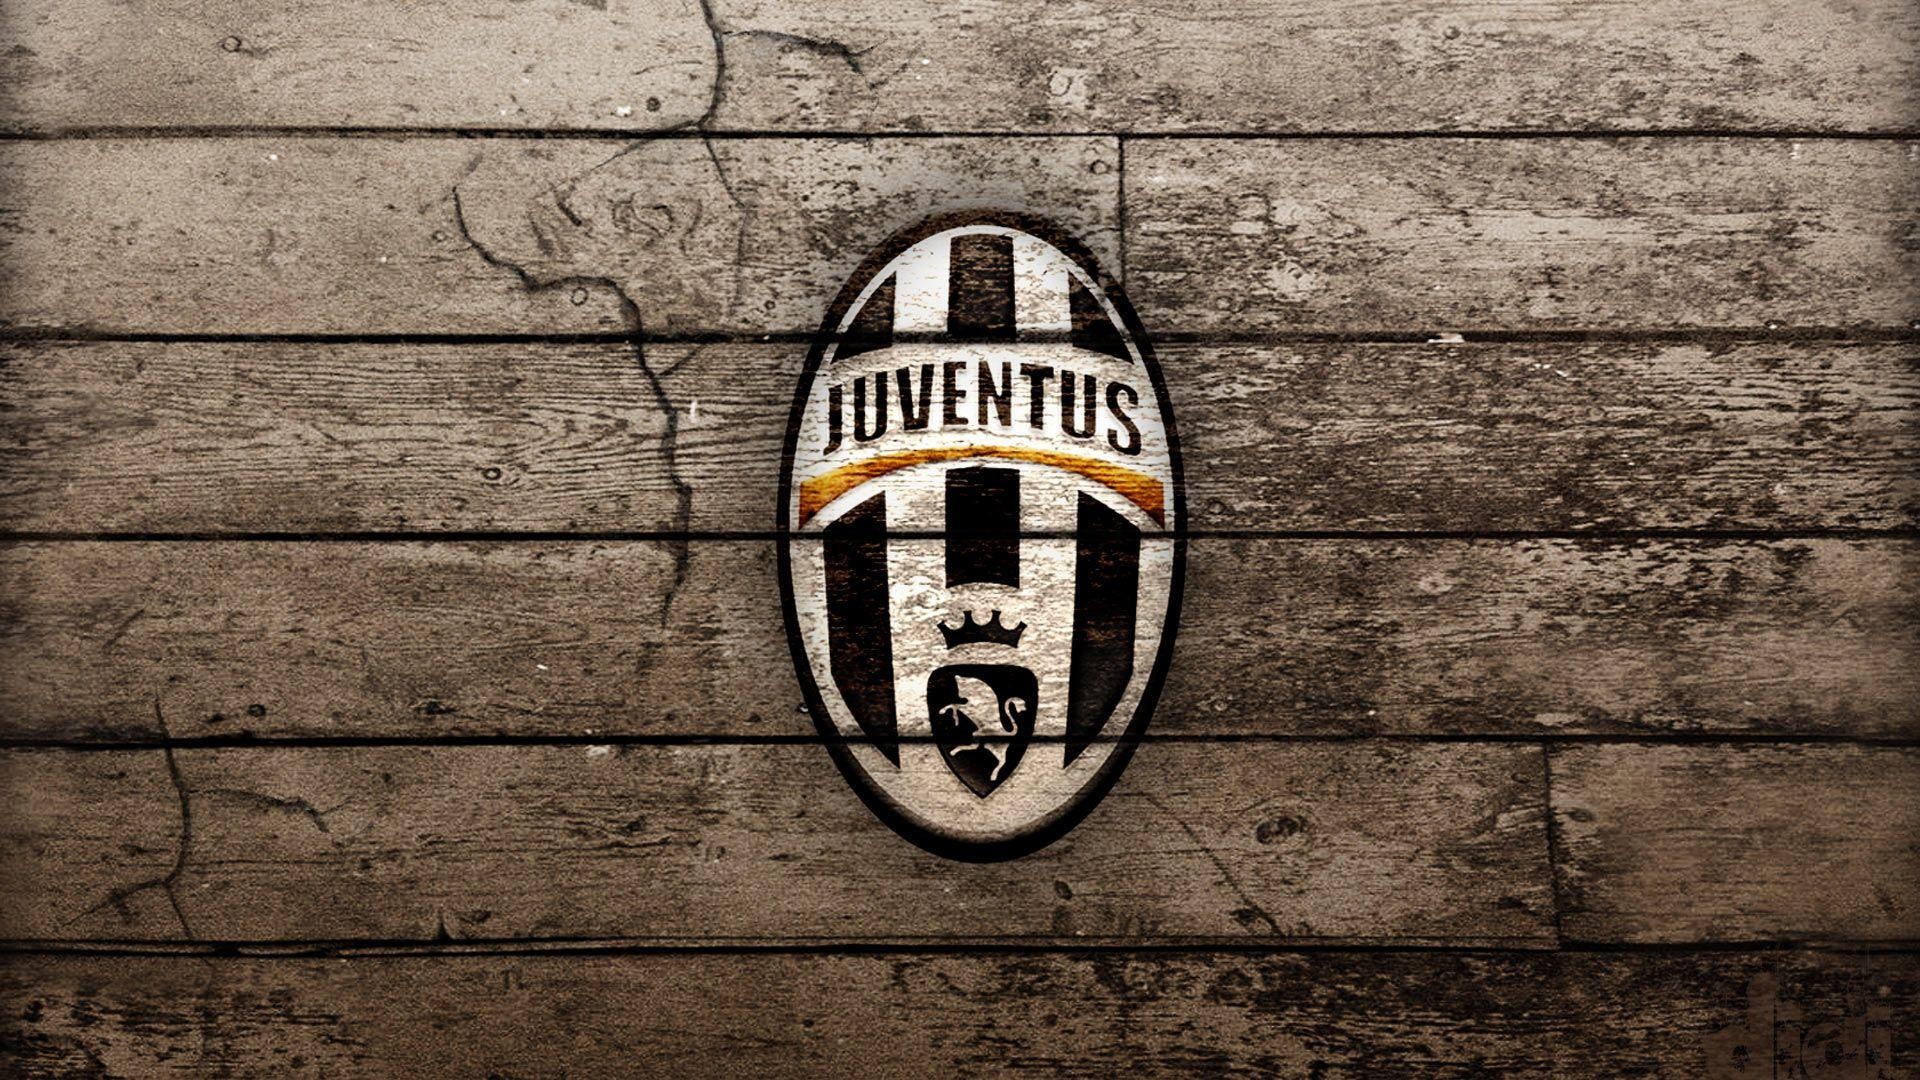 Juventus: The Old Lady, The third most successful team in Europe. 1920x1080 Full HD Wallpaper.